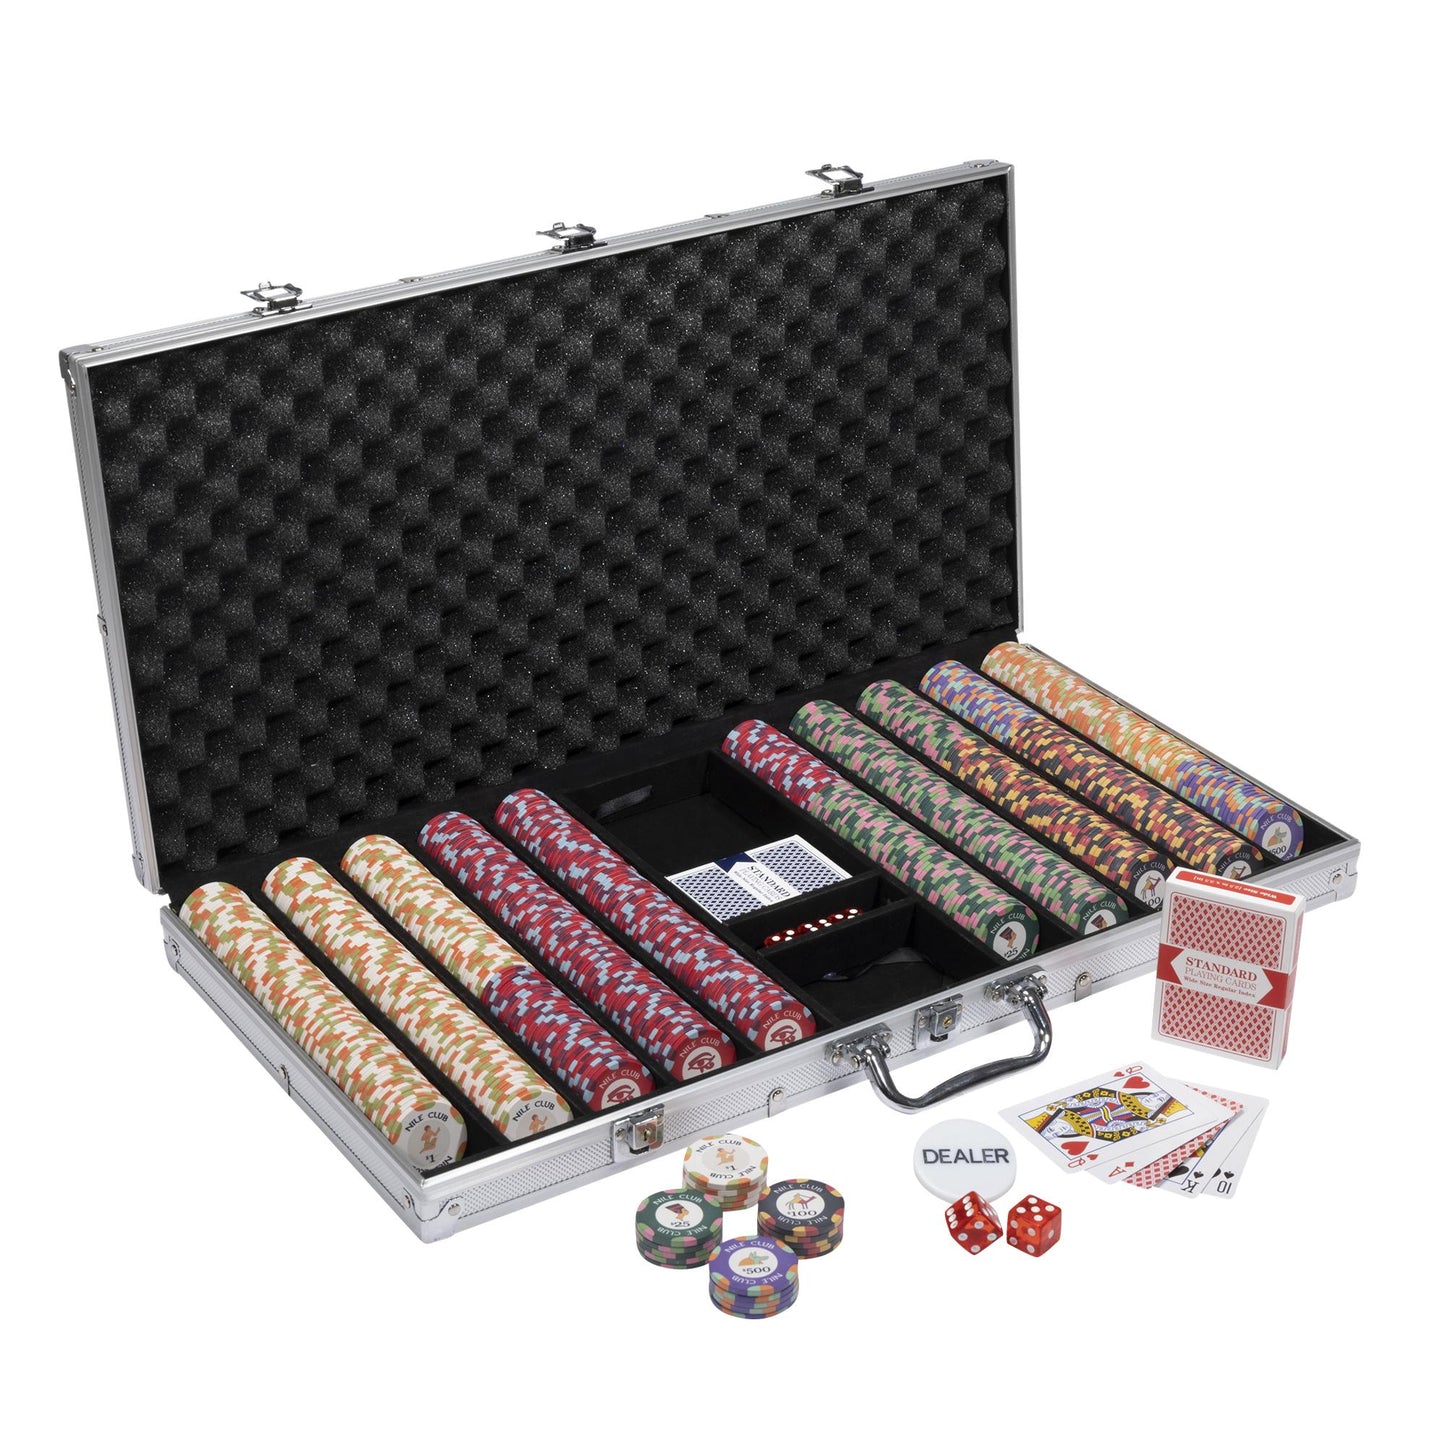 750 Nile Club Poker Chips with Aluminum Case